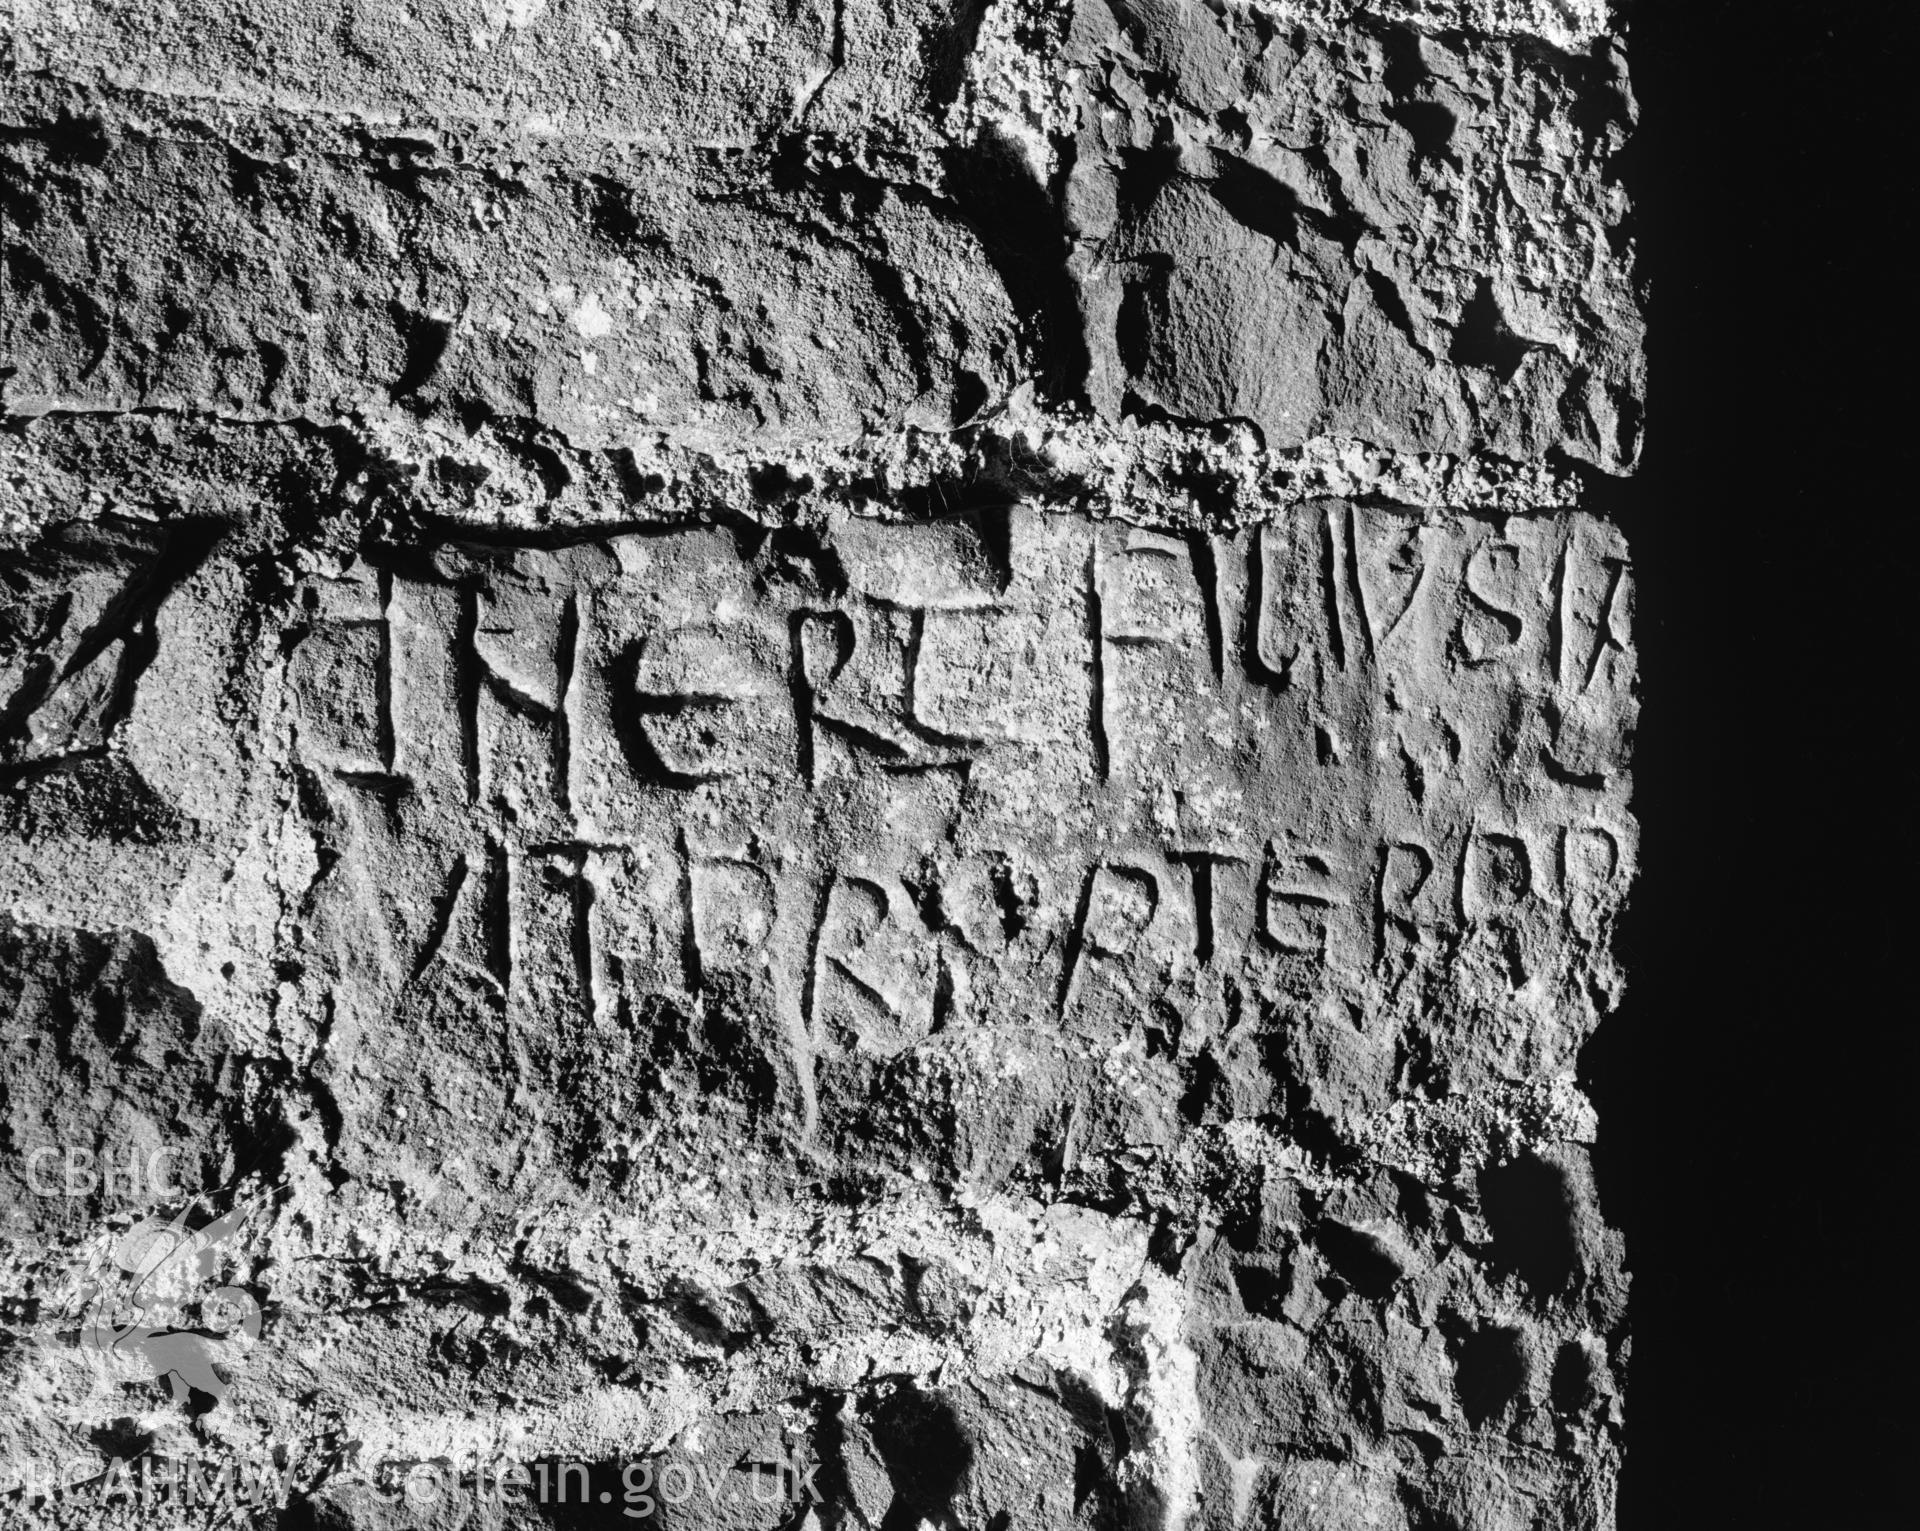 Black and white photograph of fragmentary roman-letter inscribed stone, St. David's Church, Llanddewi Brefi: Corpus of Early Medieval Inscribed Stones and Stone Sculpture in Wales, Volume II: South-West Wales', Figure CD9.3, p.151.